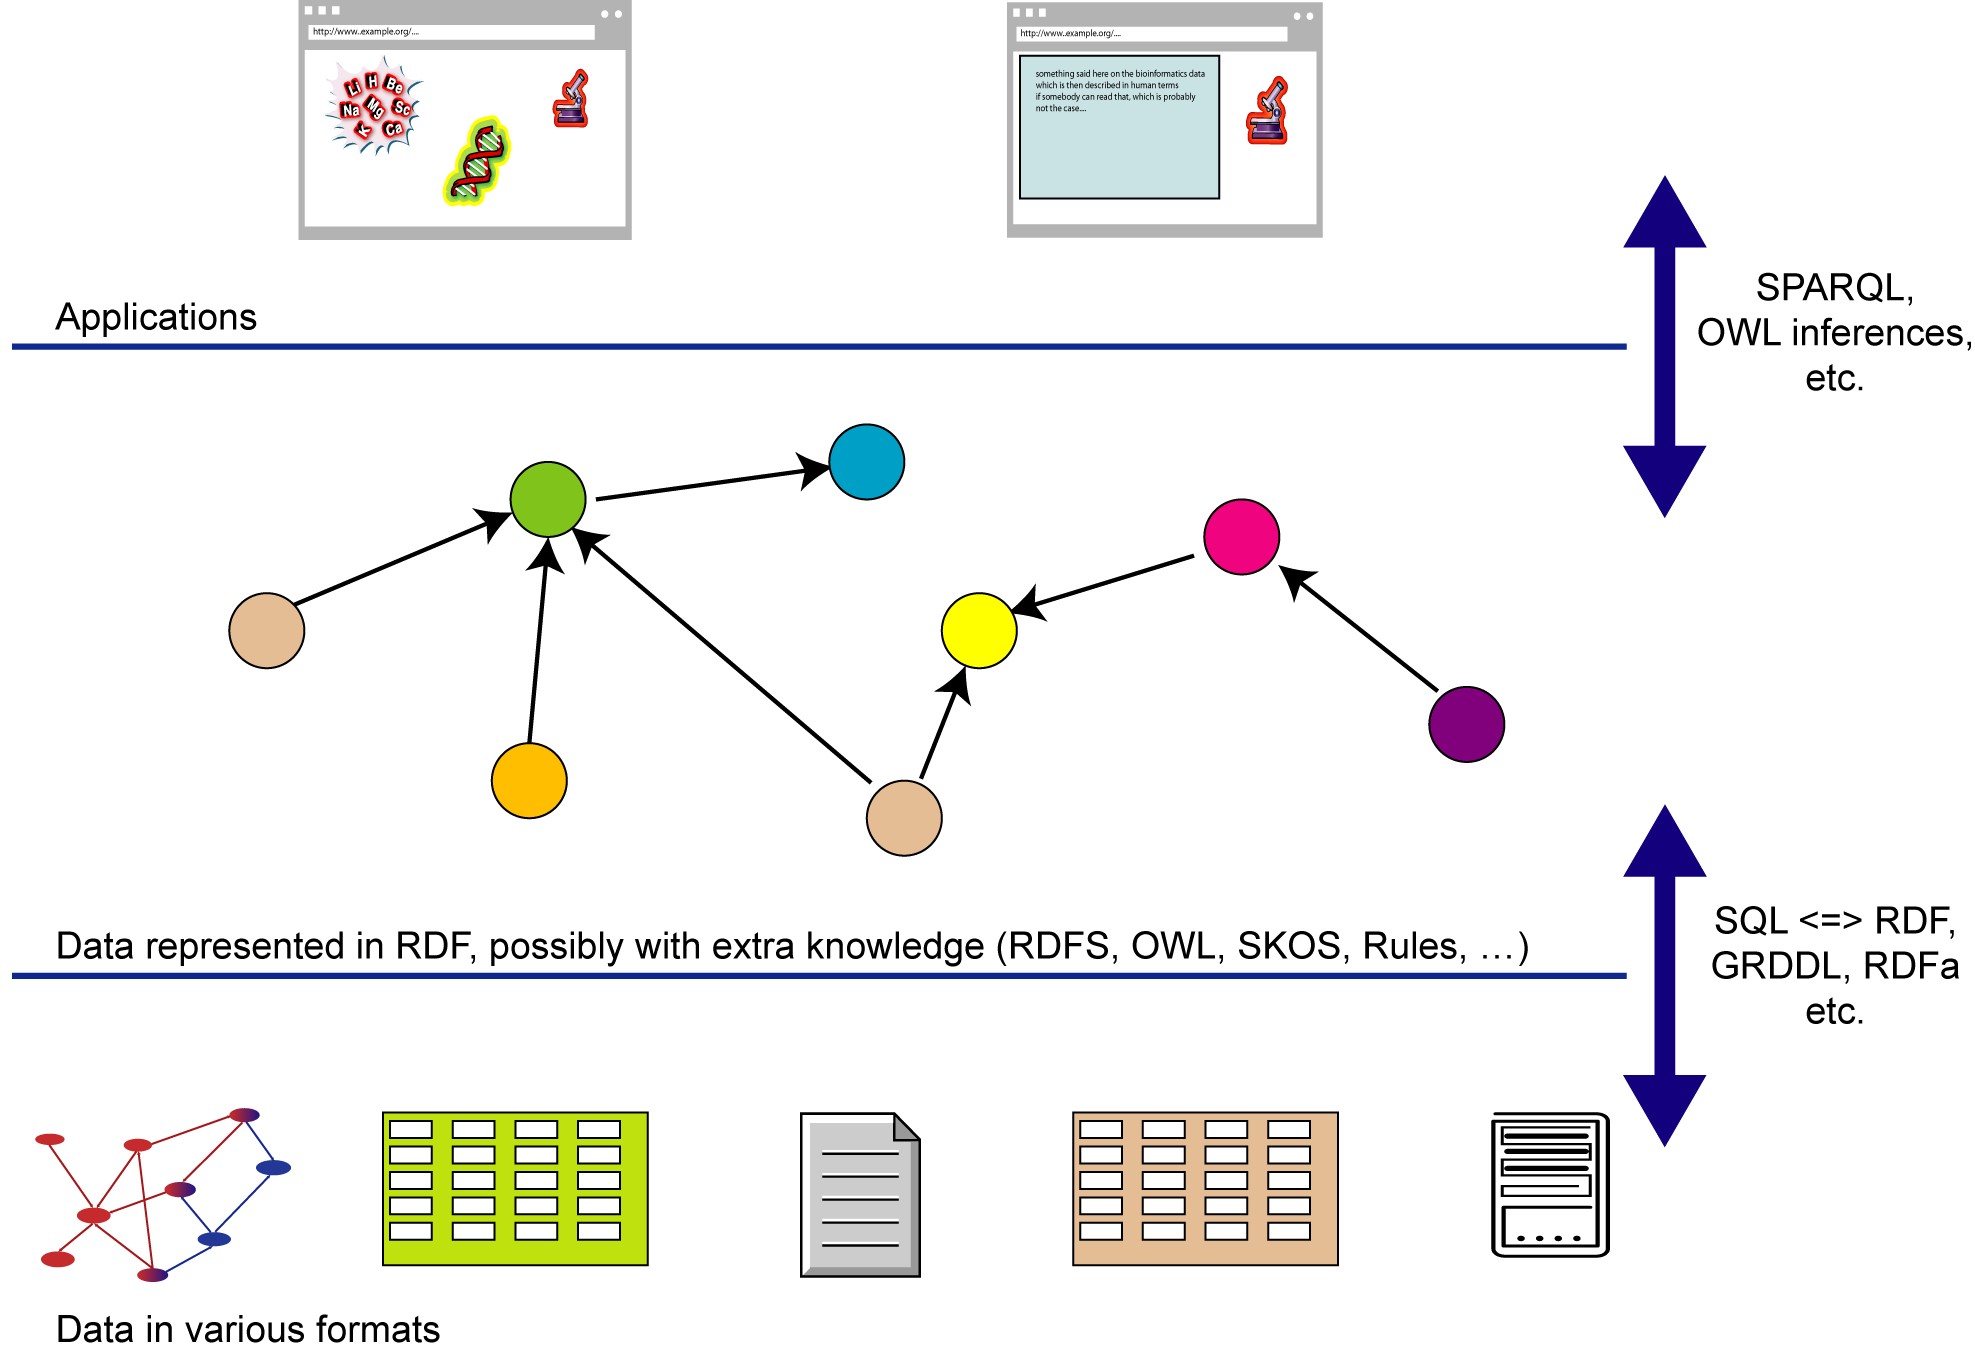 Three layer figure; from top to bottom: applications, graph, and all kinds of data in different formats,  labelled with SW technology names